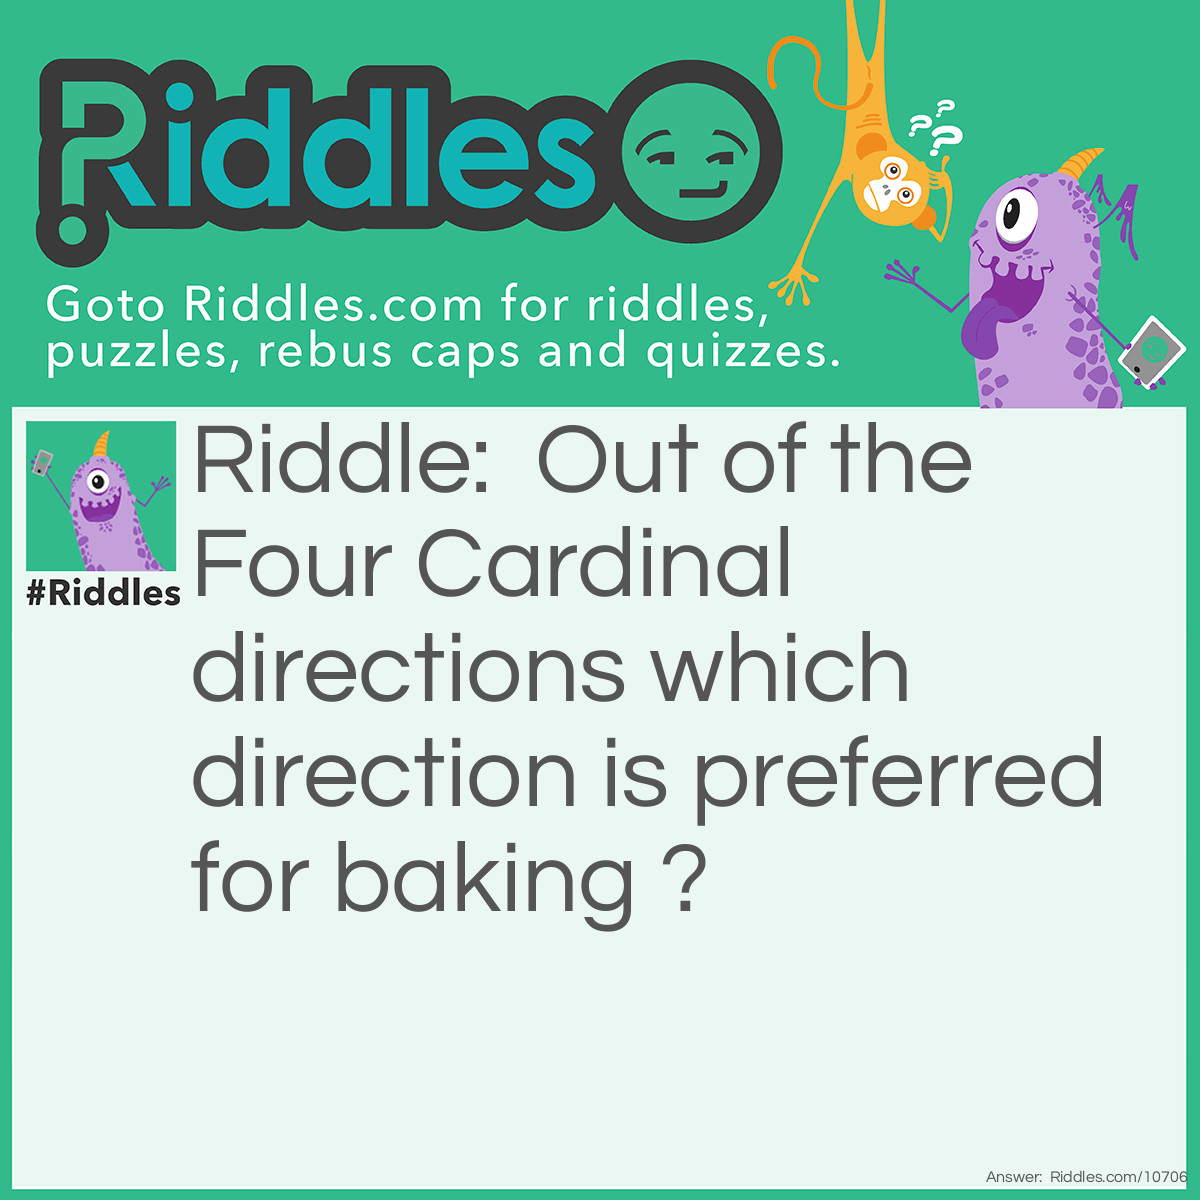 Riddle: Out of the Four Cardinal directions which direction is preferred for baking ? Answer: Y-East.